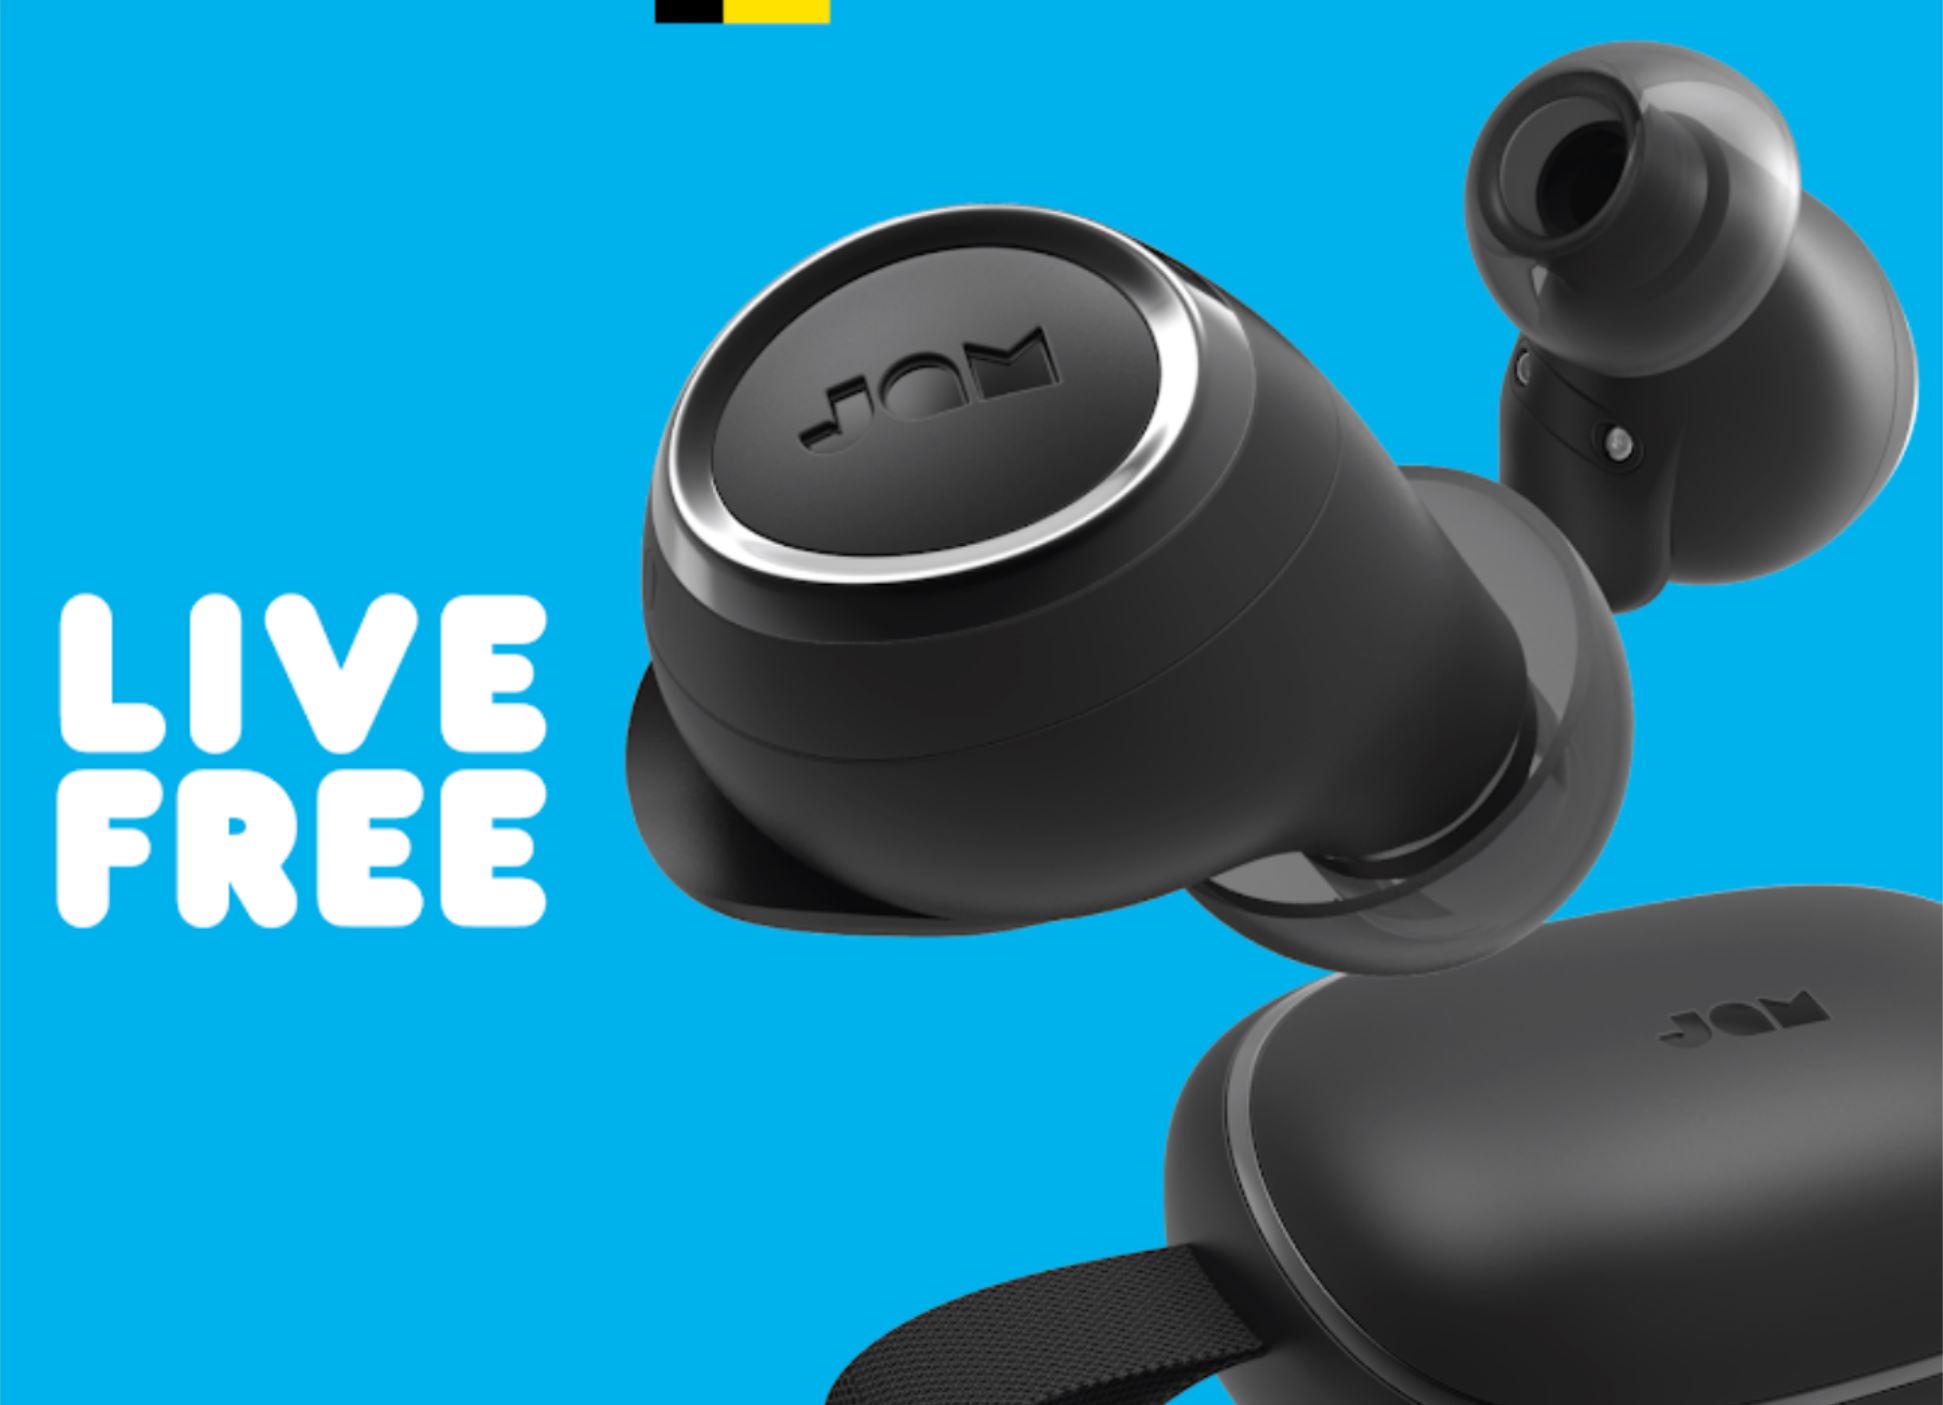 Promo image of the Jam Live Free true wireless earbuds on a blue background. The charging case is pictured in the bottom right corner of the image.